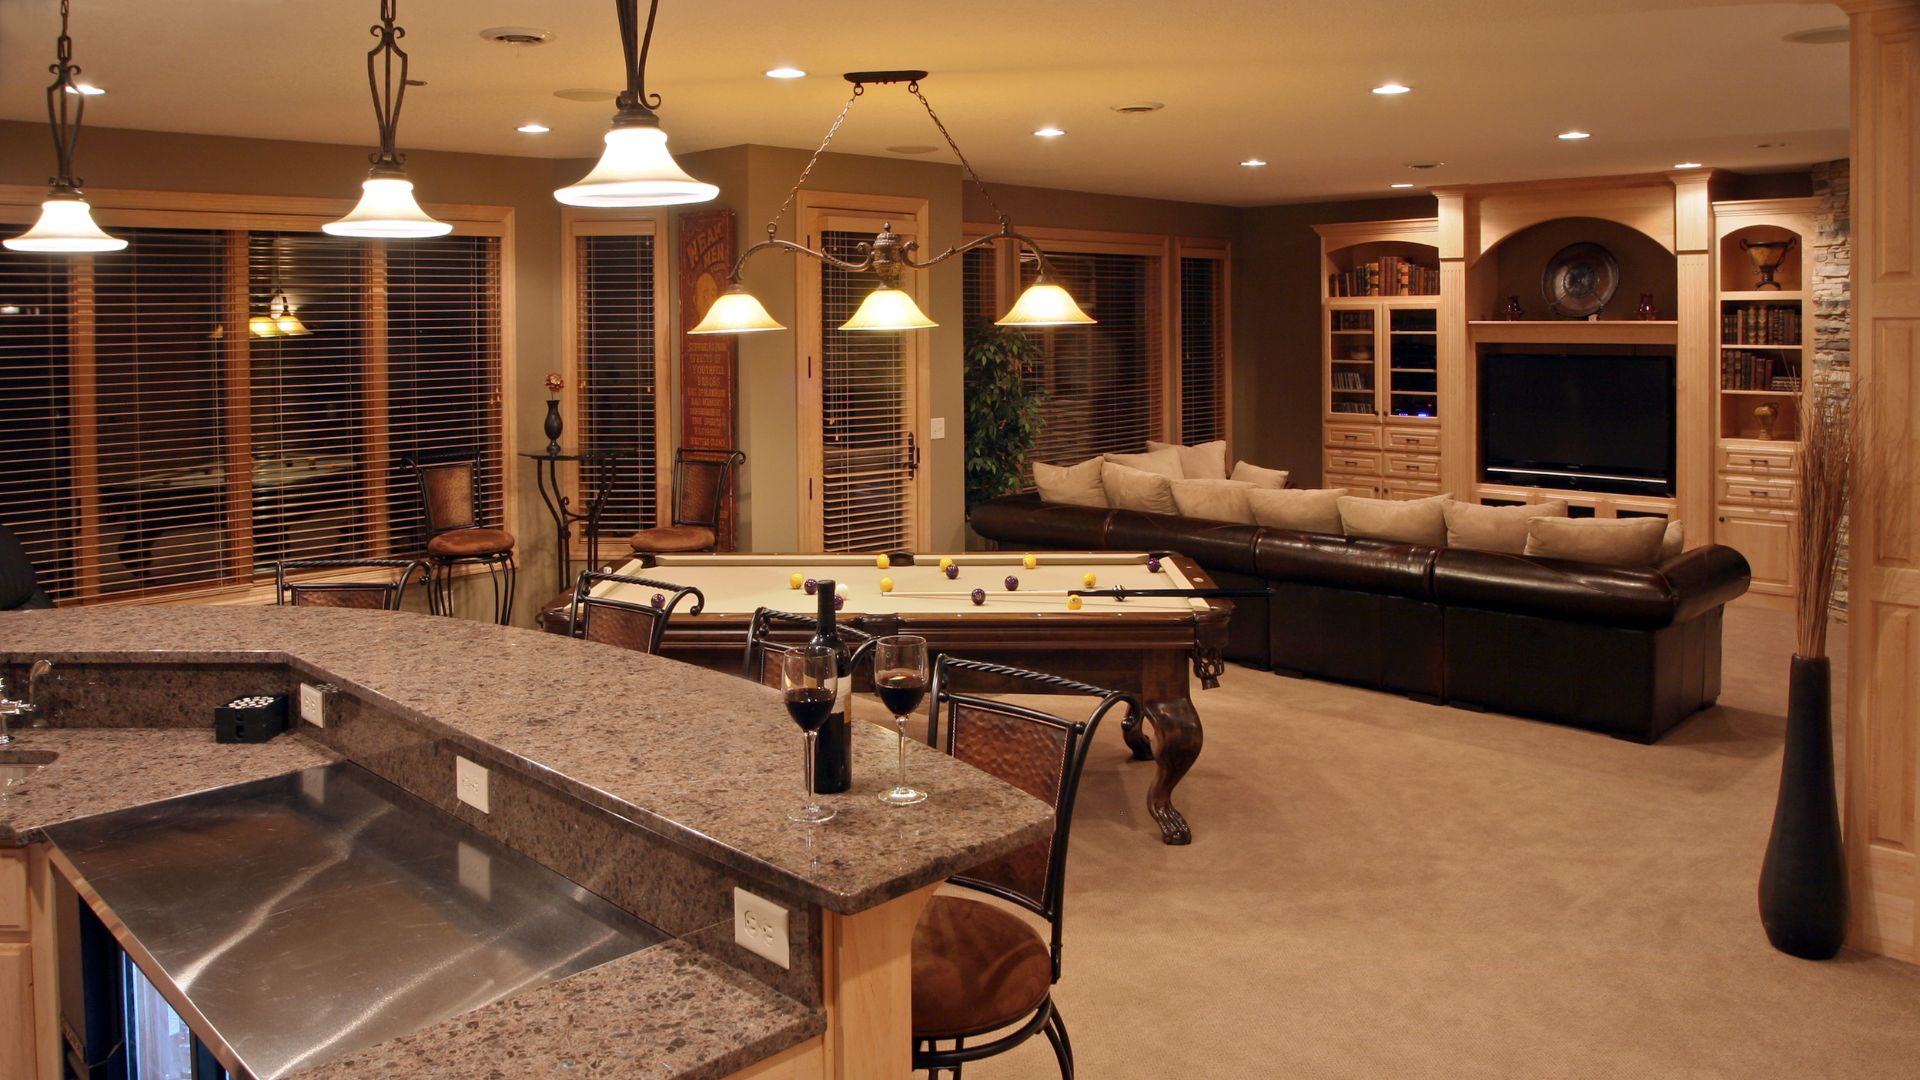 Basement Entertainment area with billiard pool between bar and living room